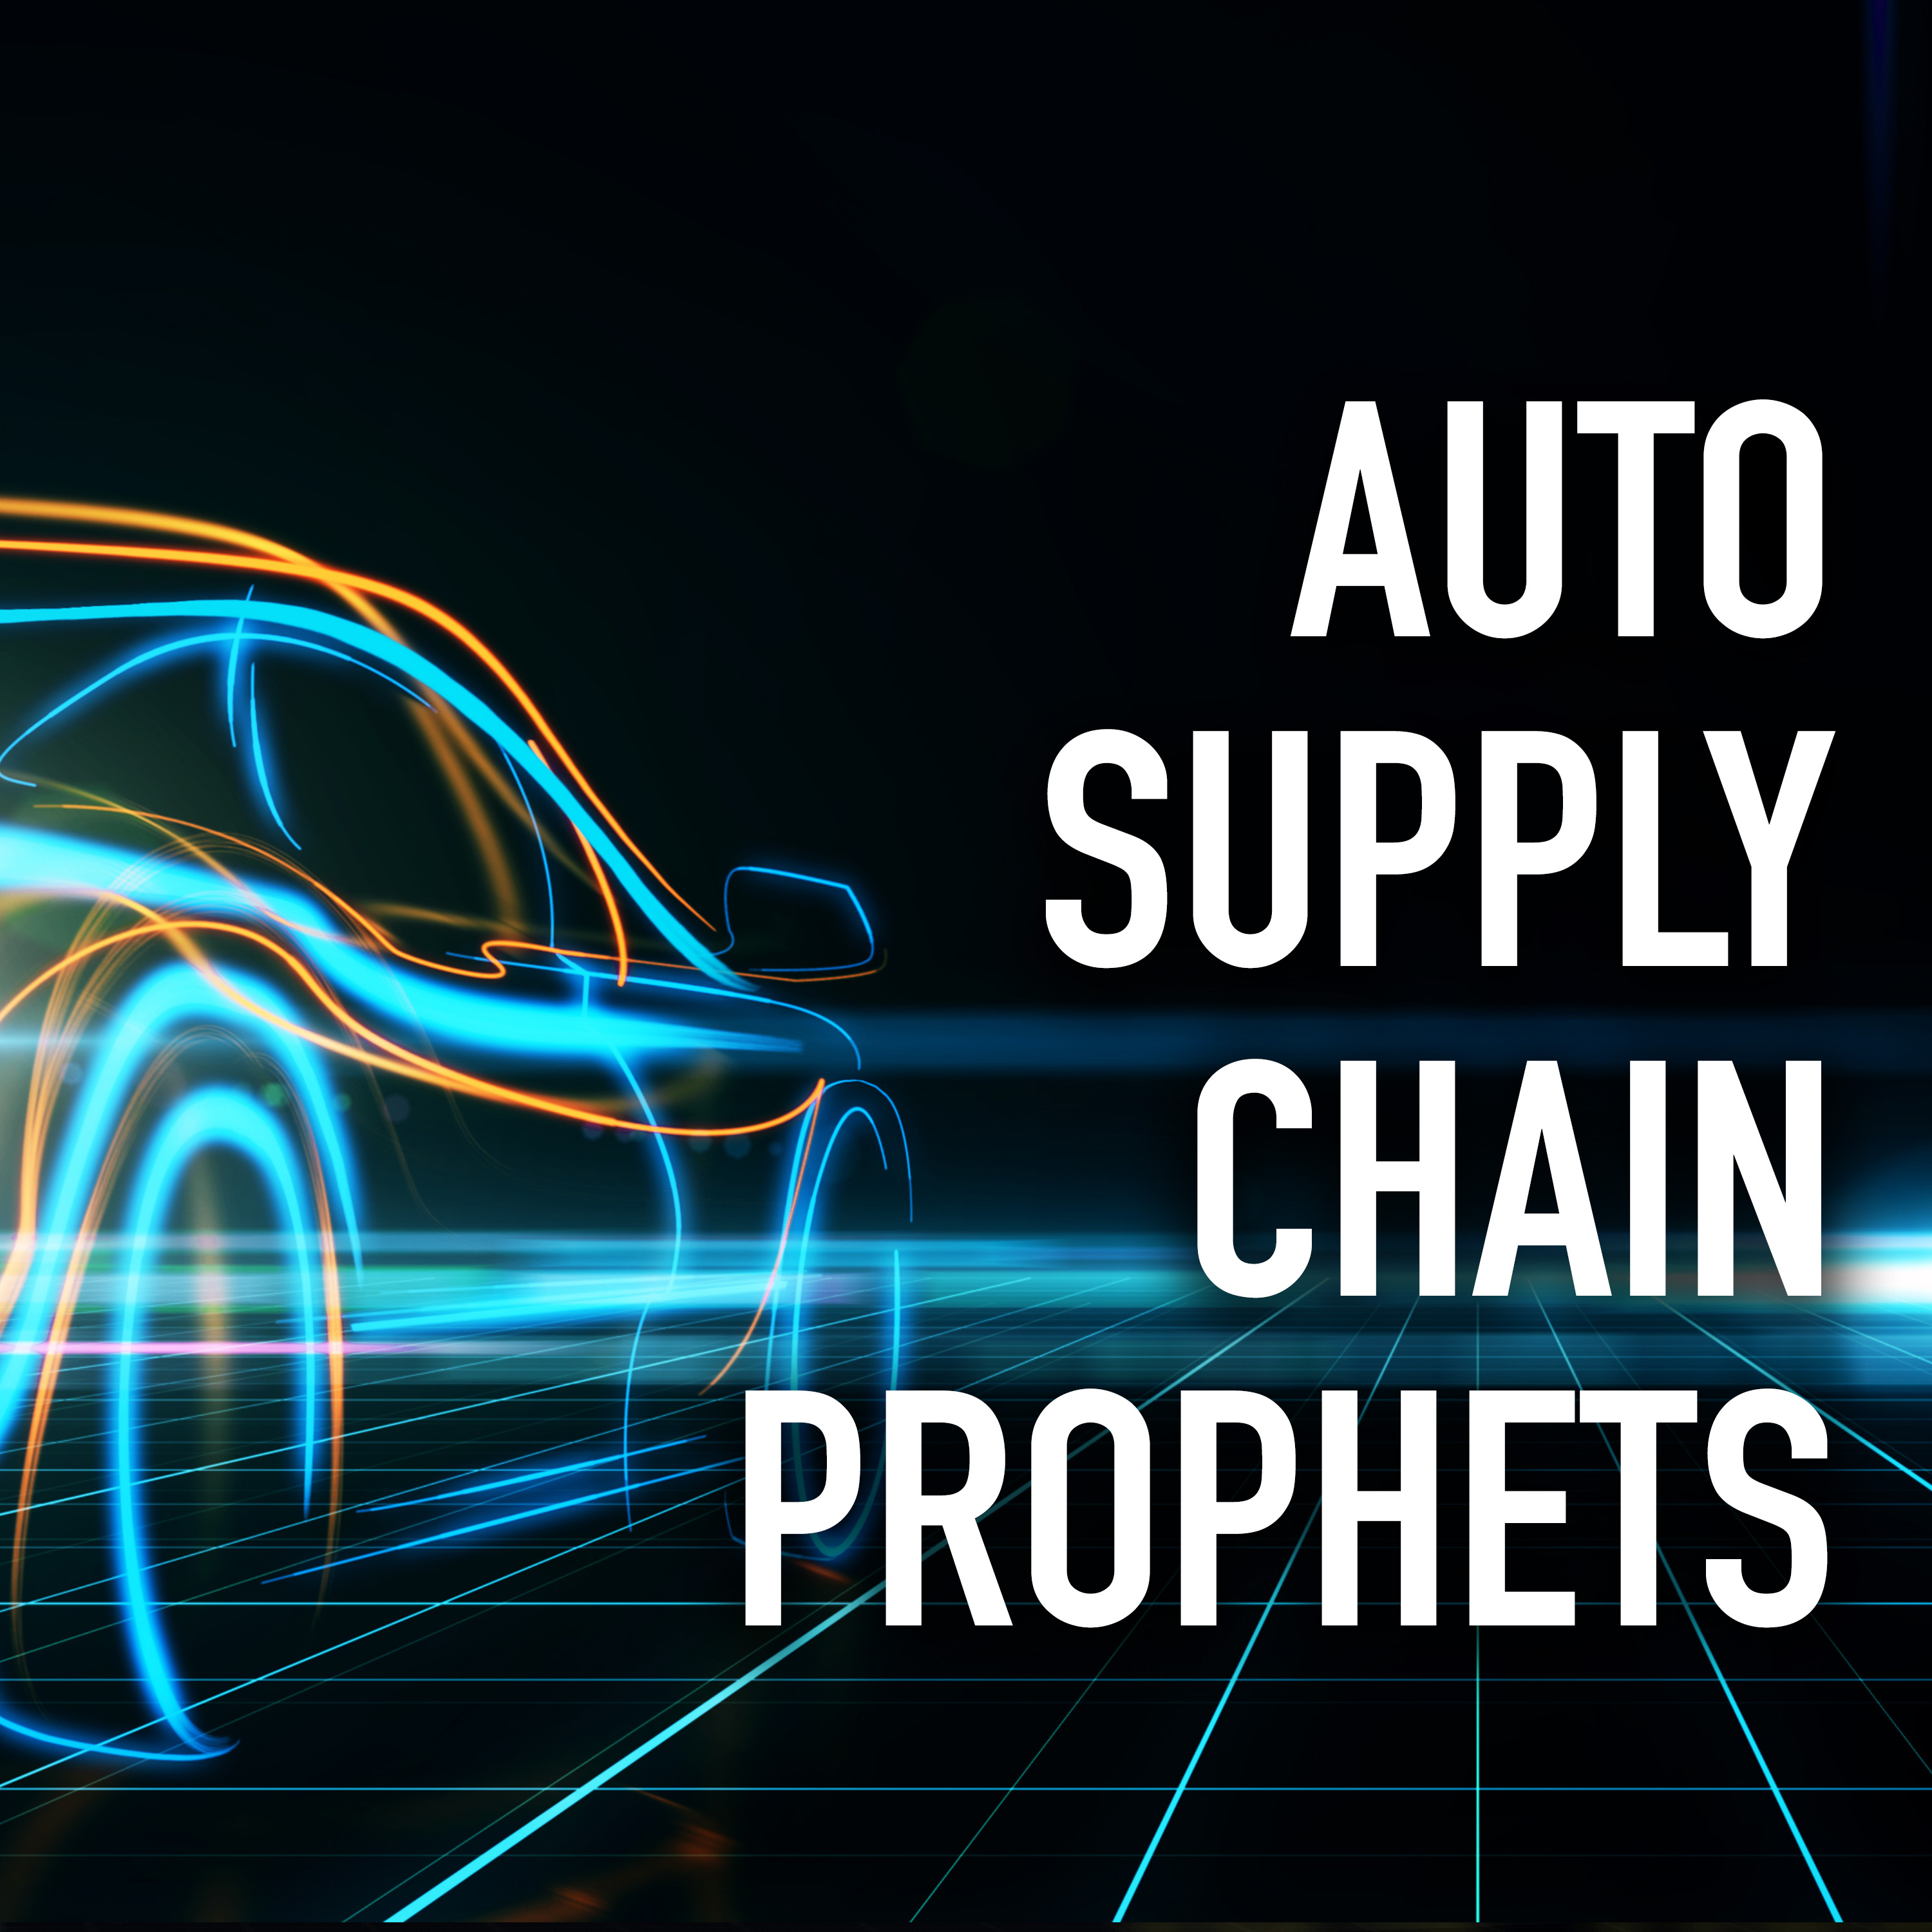 Auto Supply Chain Prophets